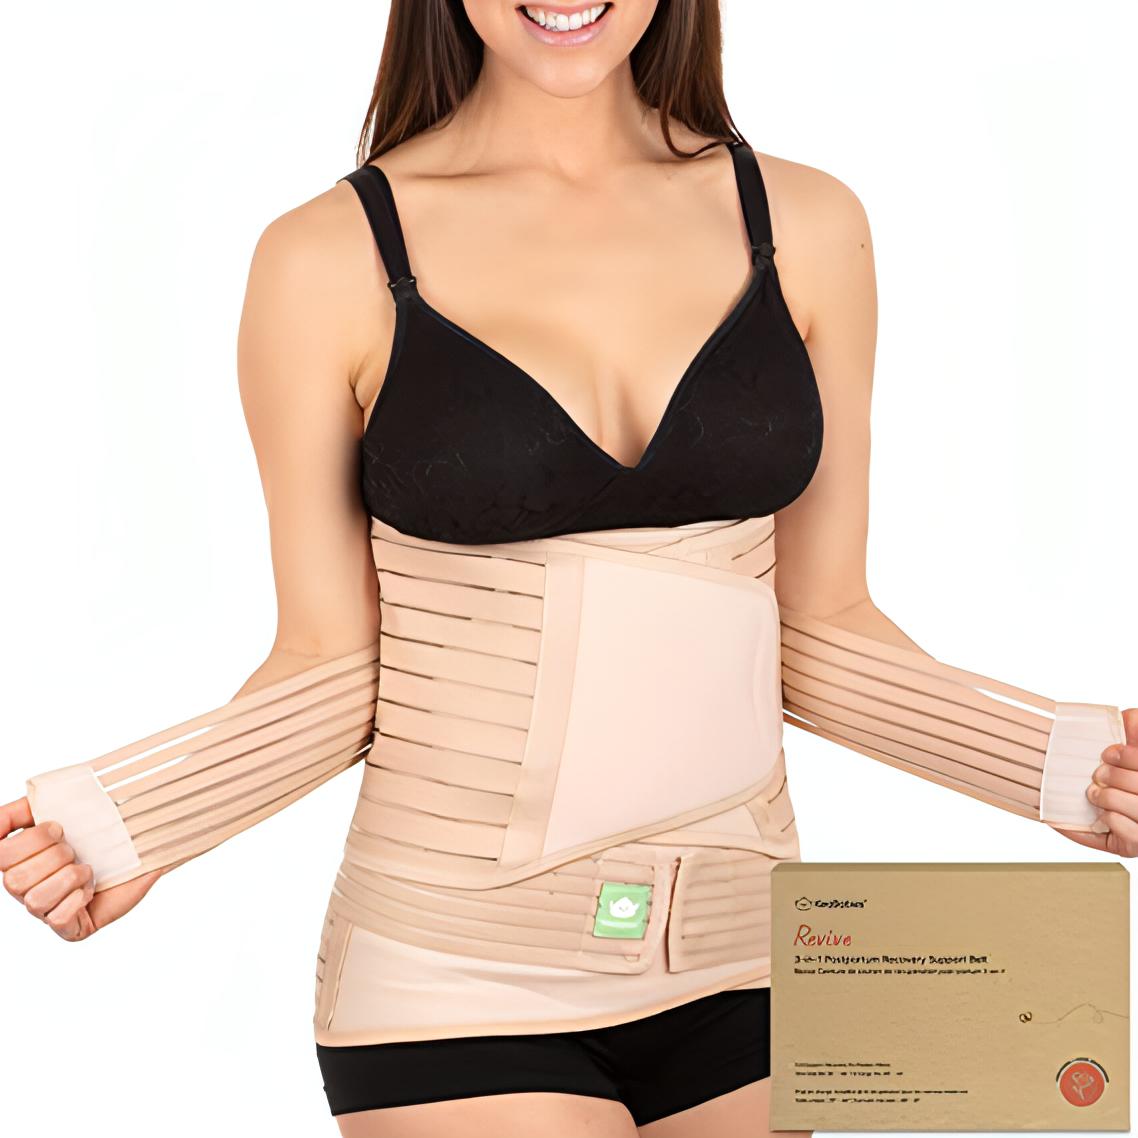 Jox-Women Postpartum Recovery Band After Baby Tummy Tuck Belt